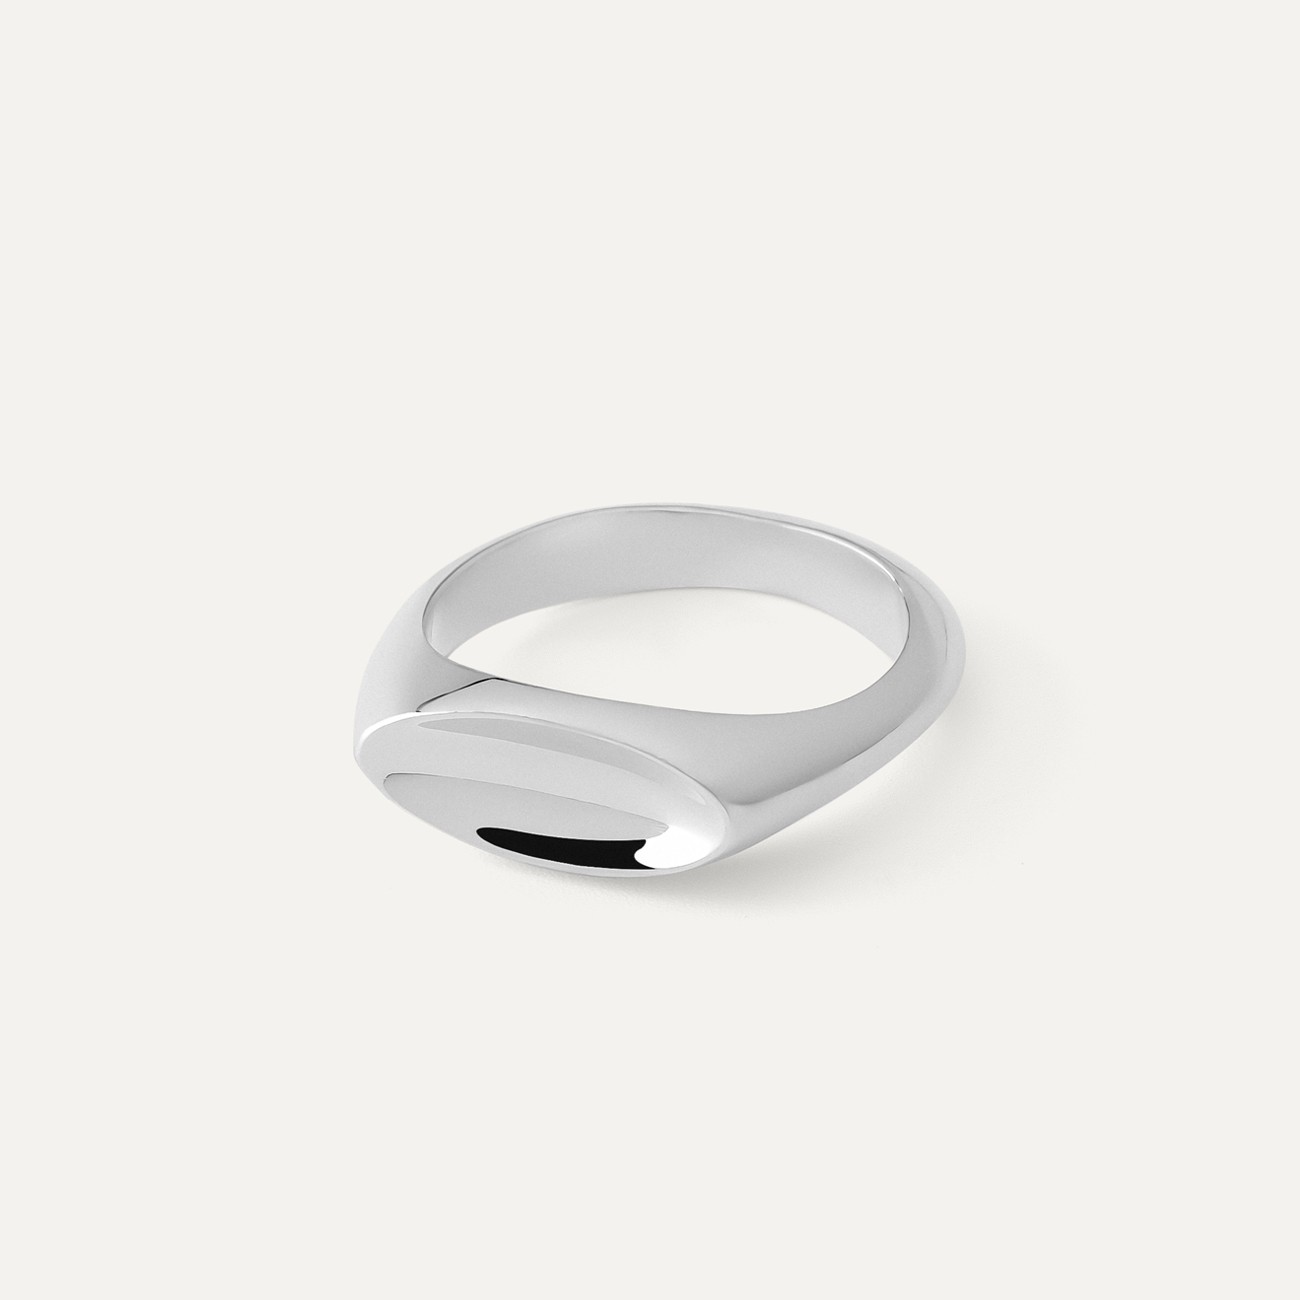 Wide ring, sterling silver 925, XENIA x GIORRE